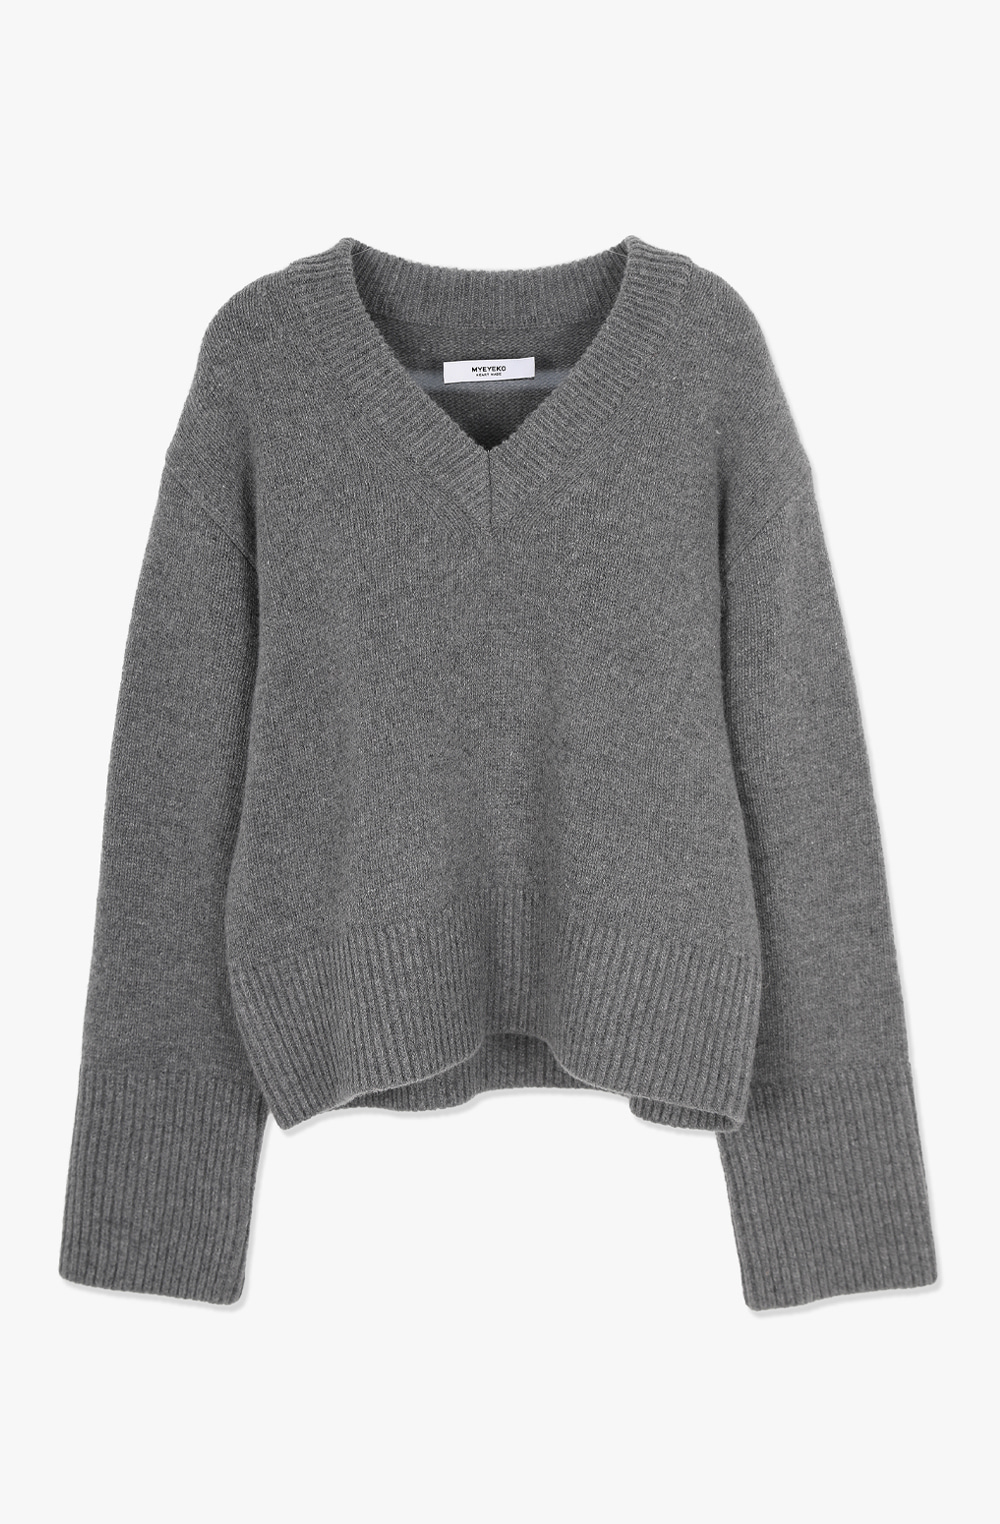 HIGH QUALITY LINE - MYEYEKO 23 Capsule Collection / Yves V-neck Merino Wool &amp; Cashmere Sweater (CHARCOAL GRAY)